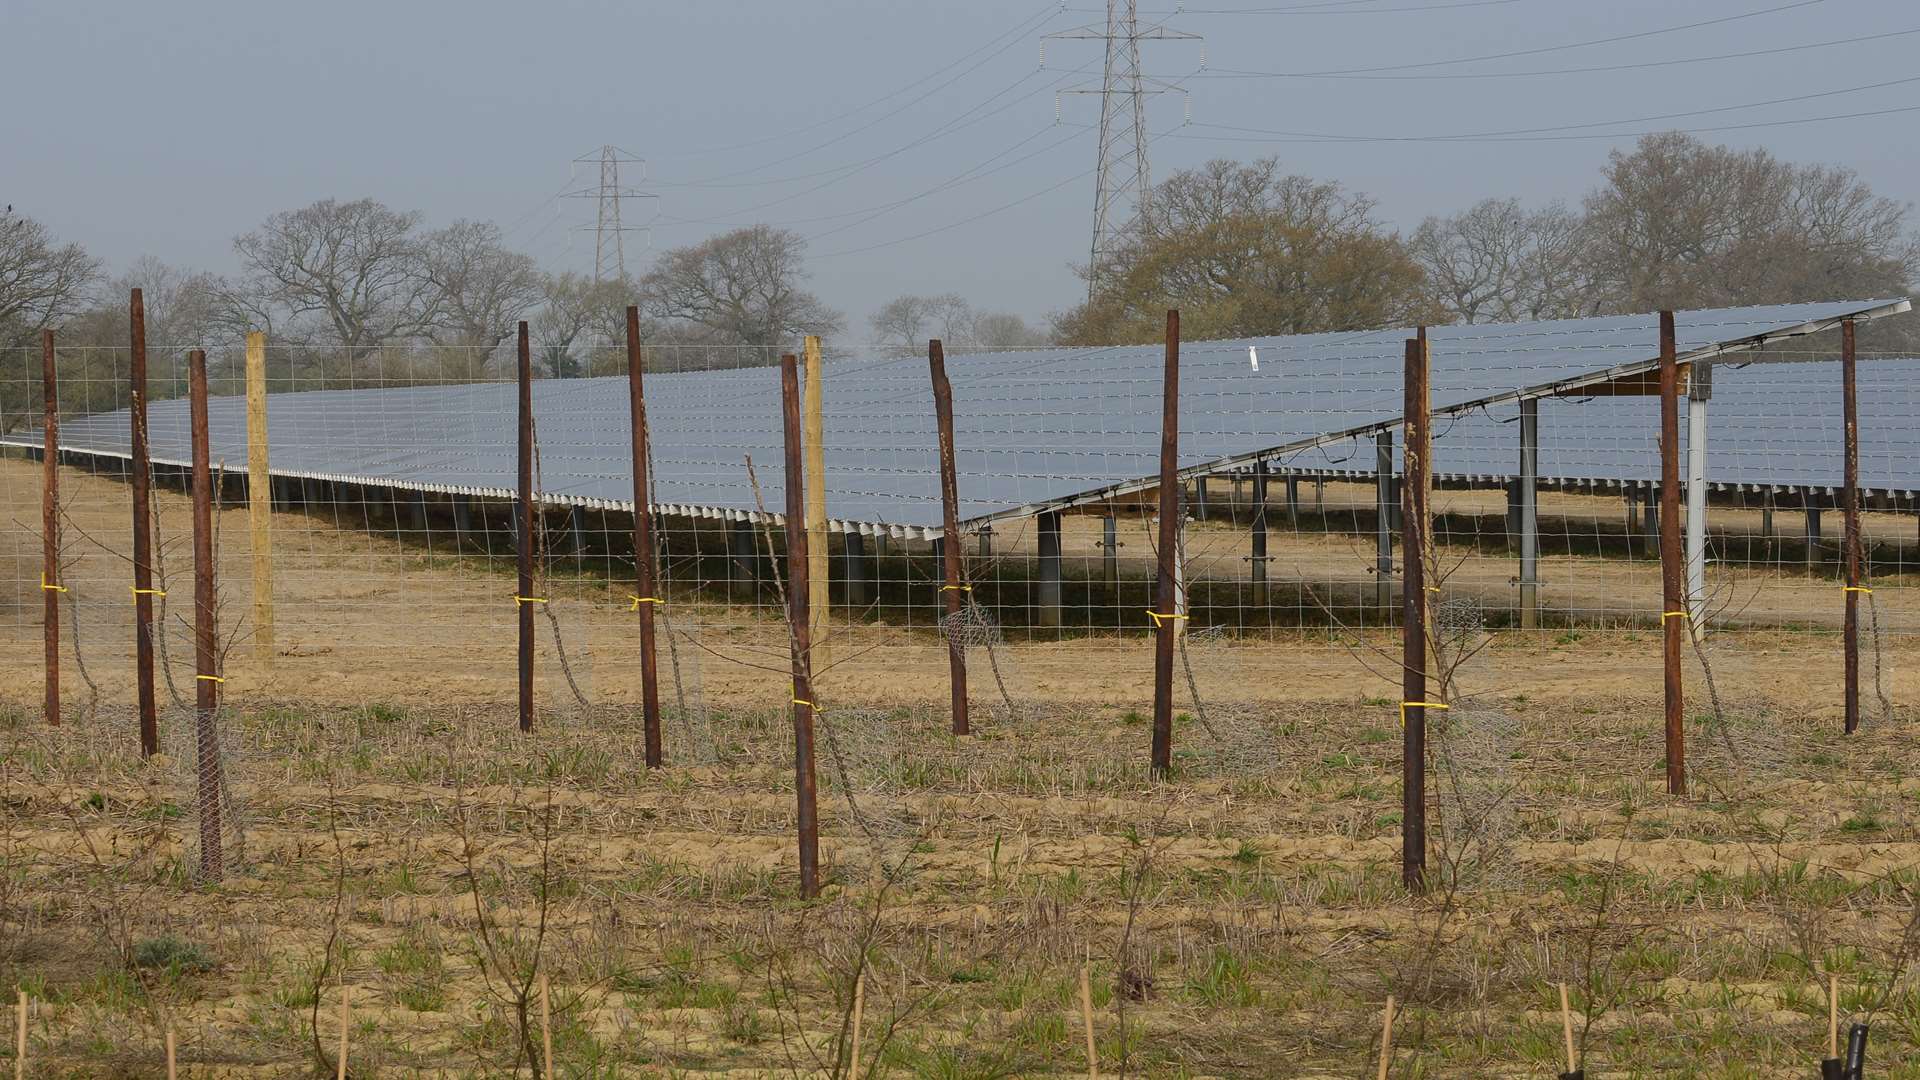 Paddock Wood solar farm produces enough electricity to power 2,800 homes